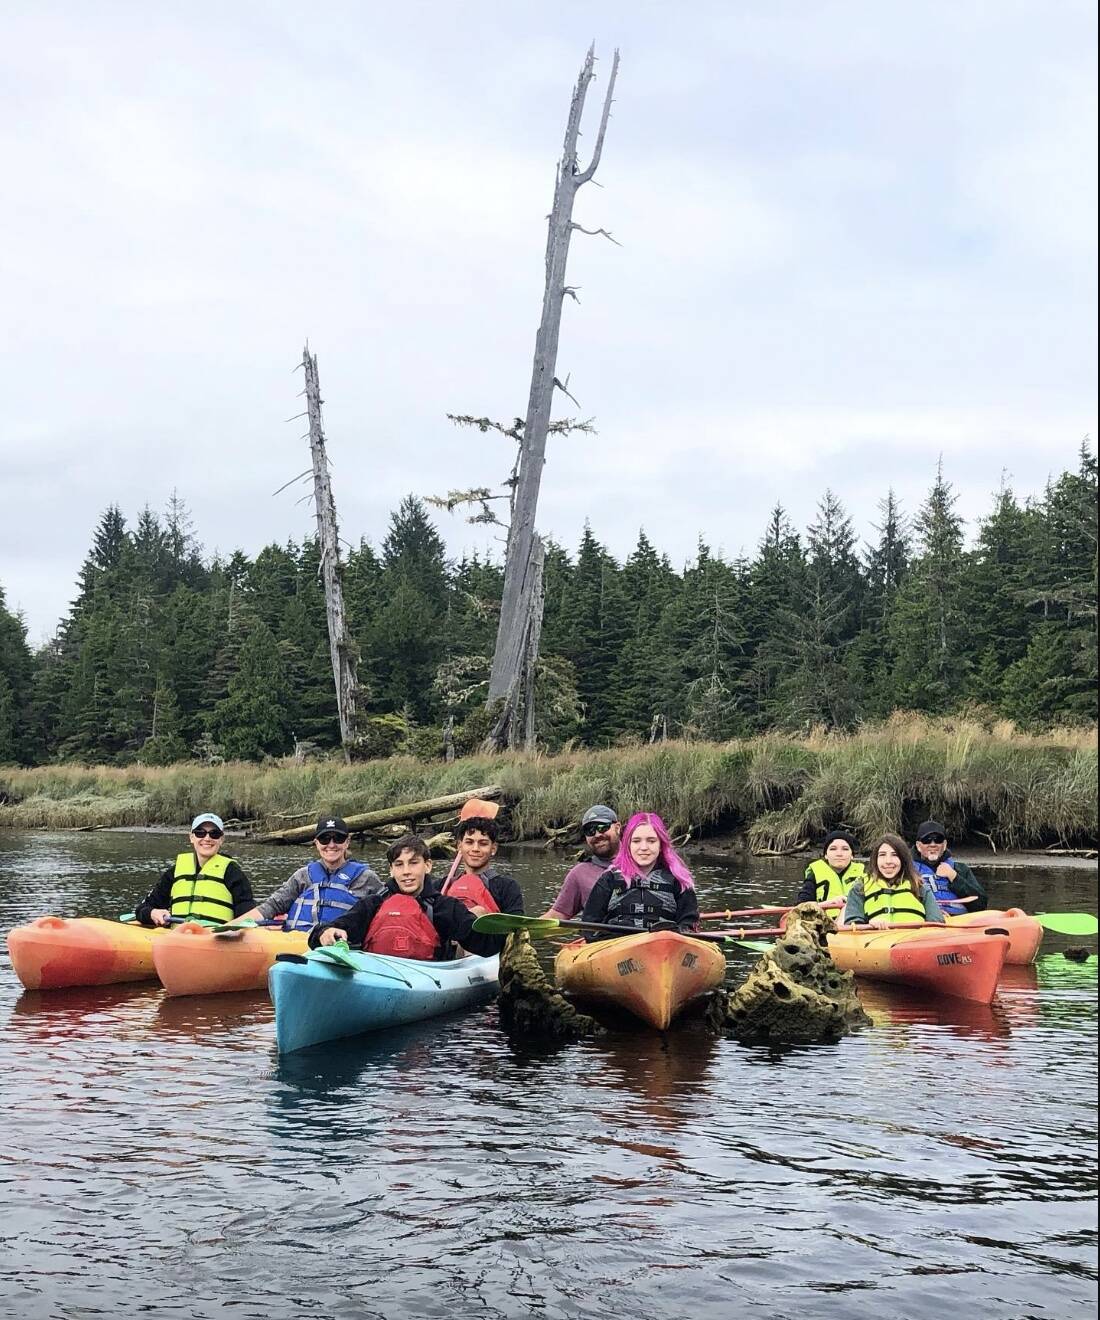 Clayton Franke / The Daily World
Paddlers visit the ghost forest on a tour with Buck’s Northwest, an outdoor adventure store in Seabrook.